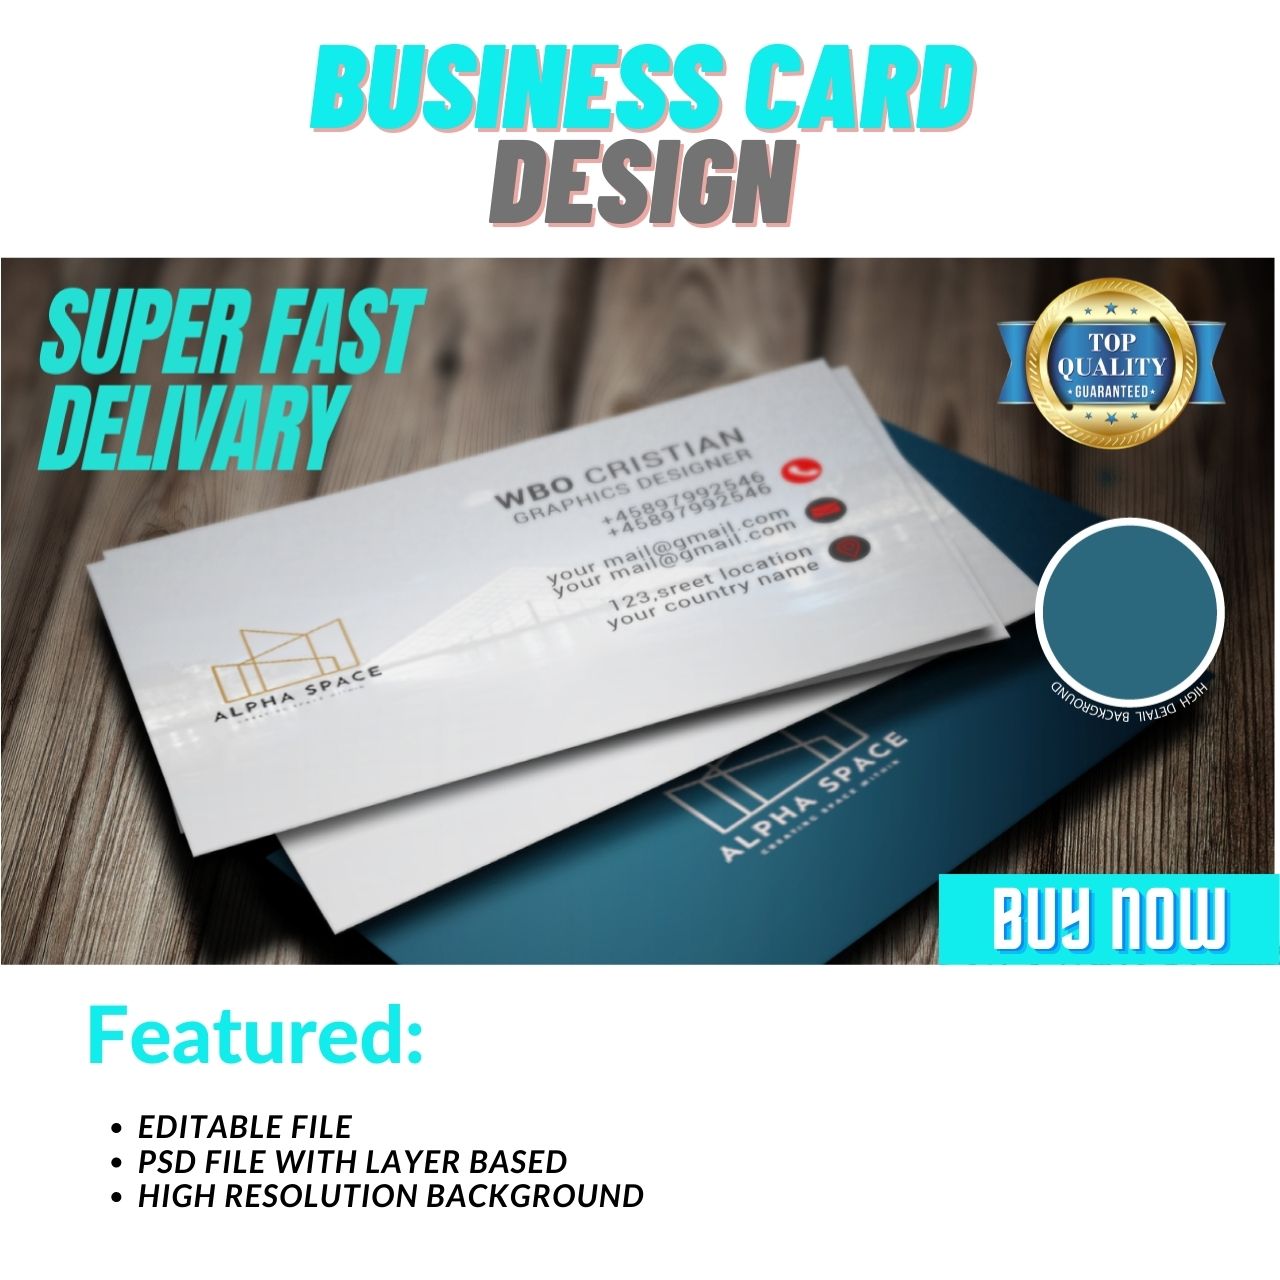 A Professional Business Card Design cover image.